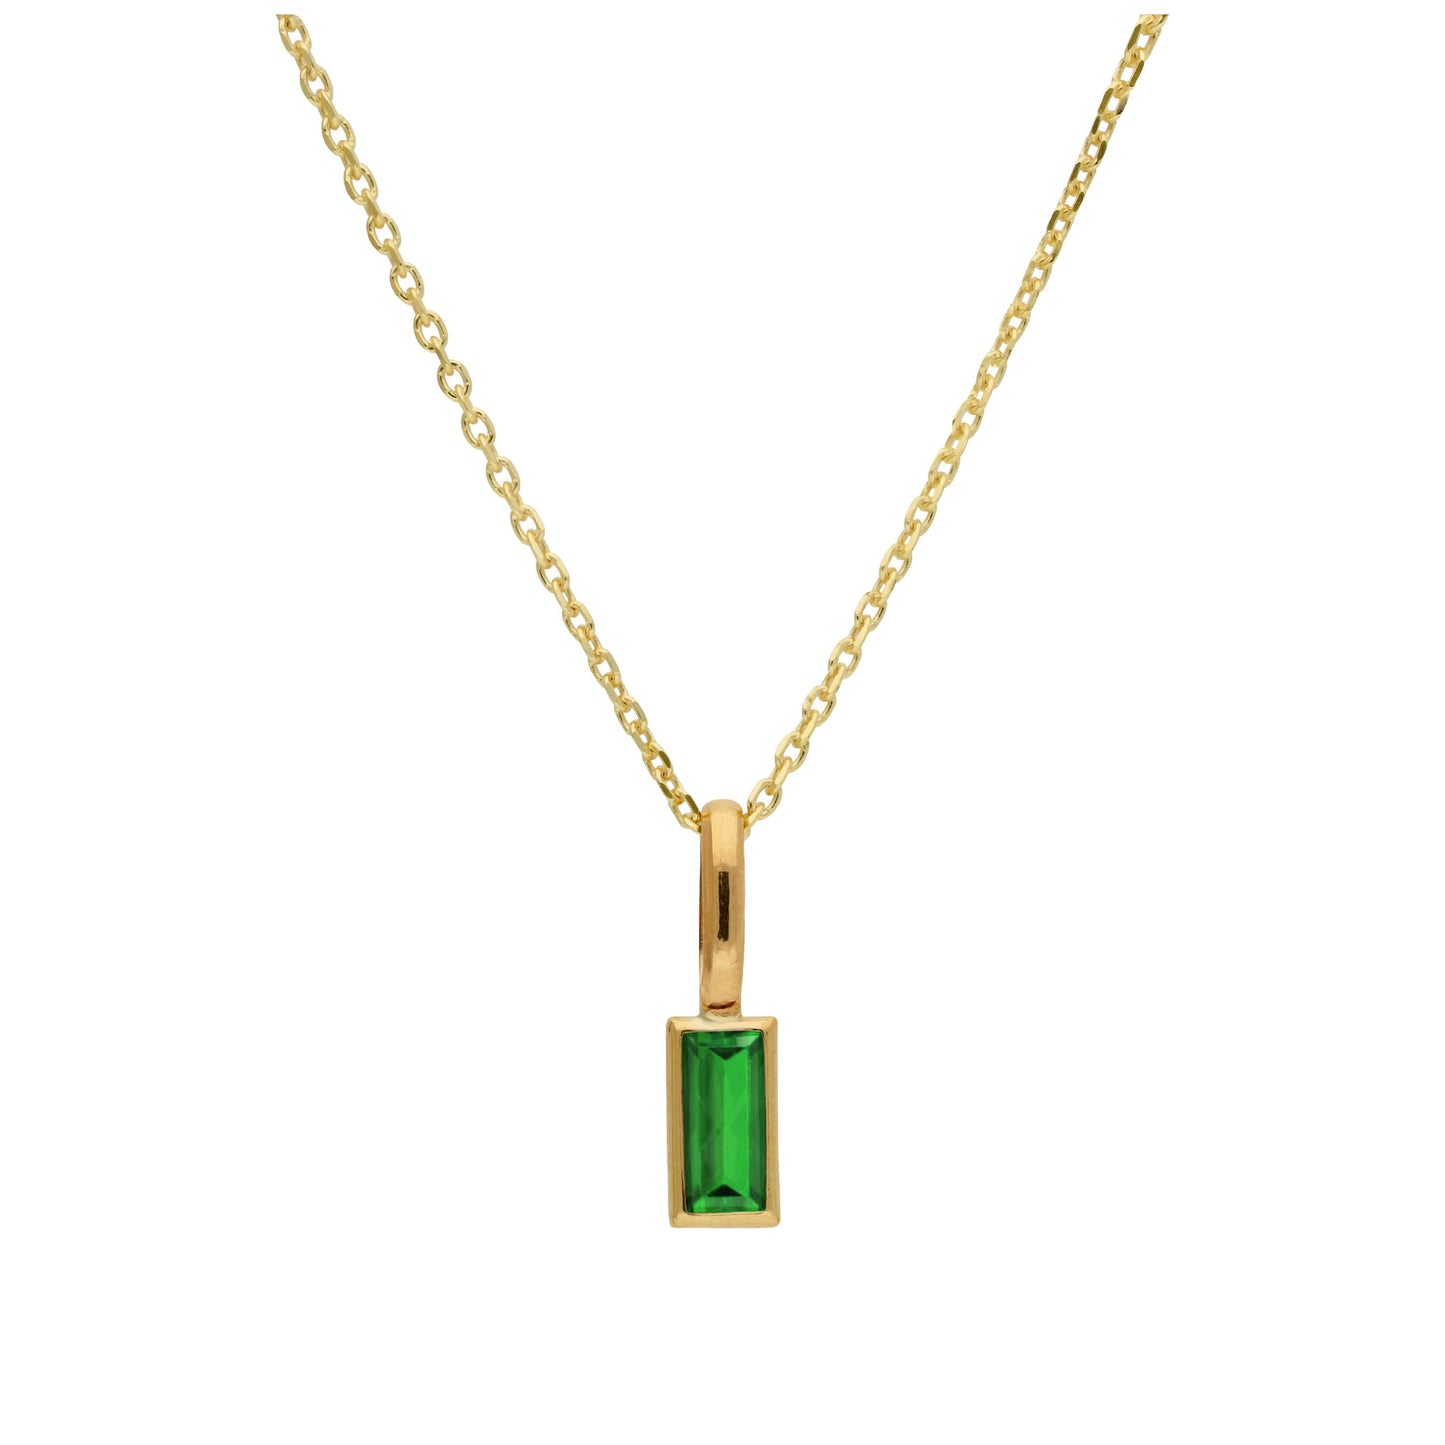 9ct Gold Baguette Emerald CZ Necklace 16 - 20 Inches